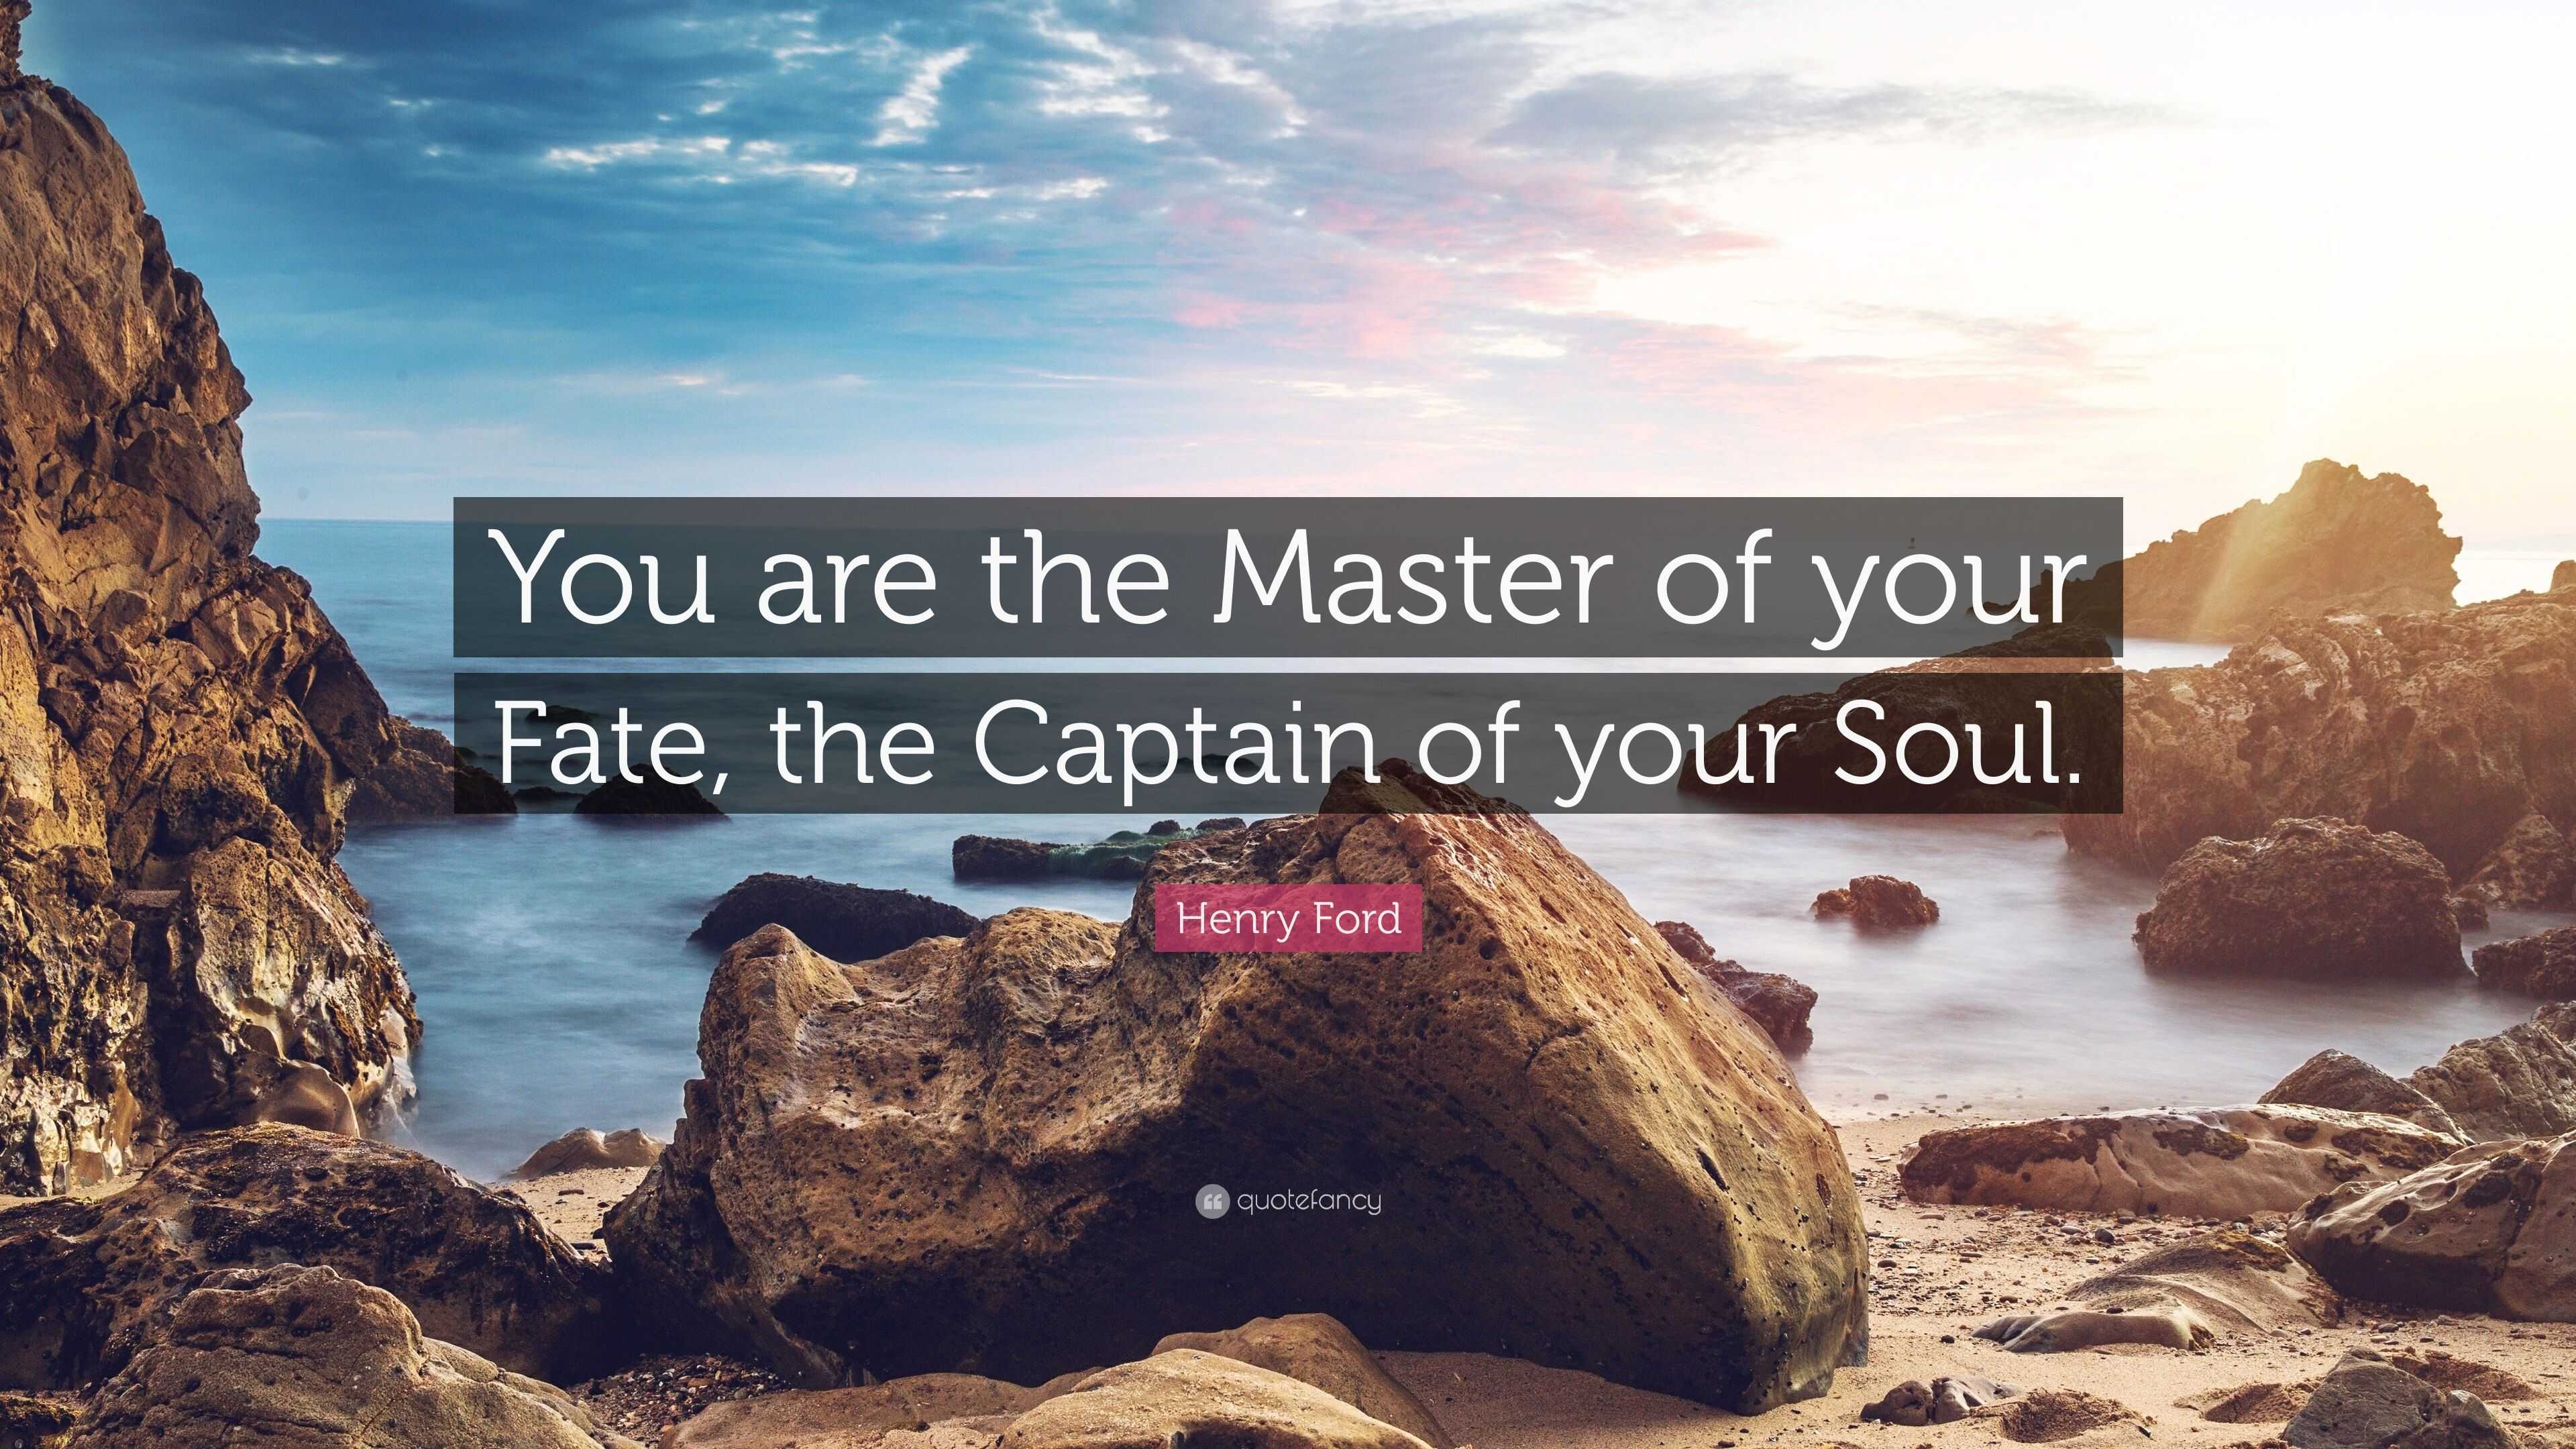 https://quotefancy.com/media/wallpaper/3840x2160/4689721-Henry-Ford-Quote-You-are-the-Master-of-your-Fate-the-Captain-of.jpg